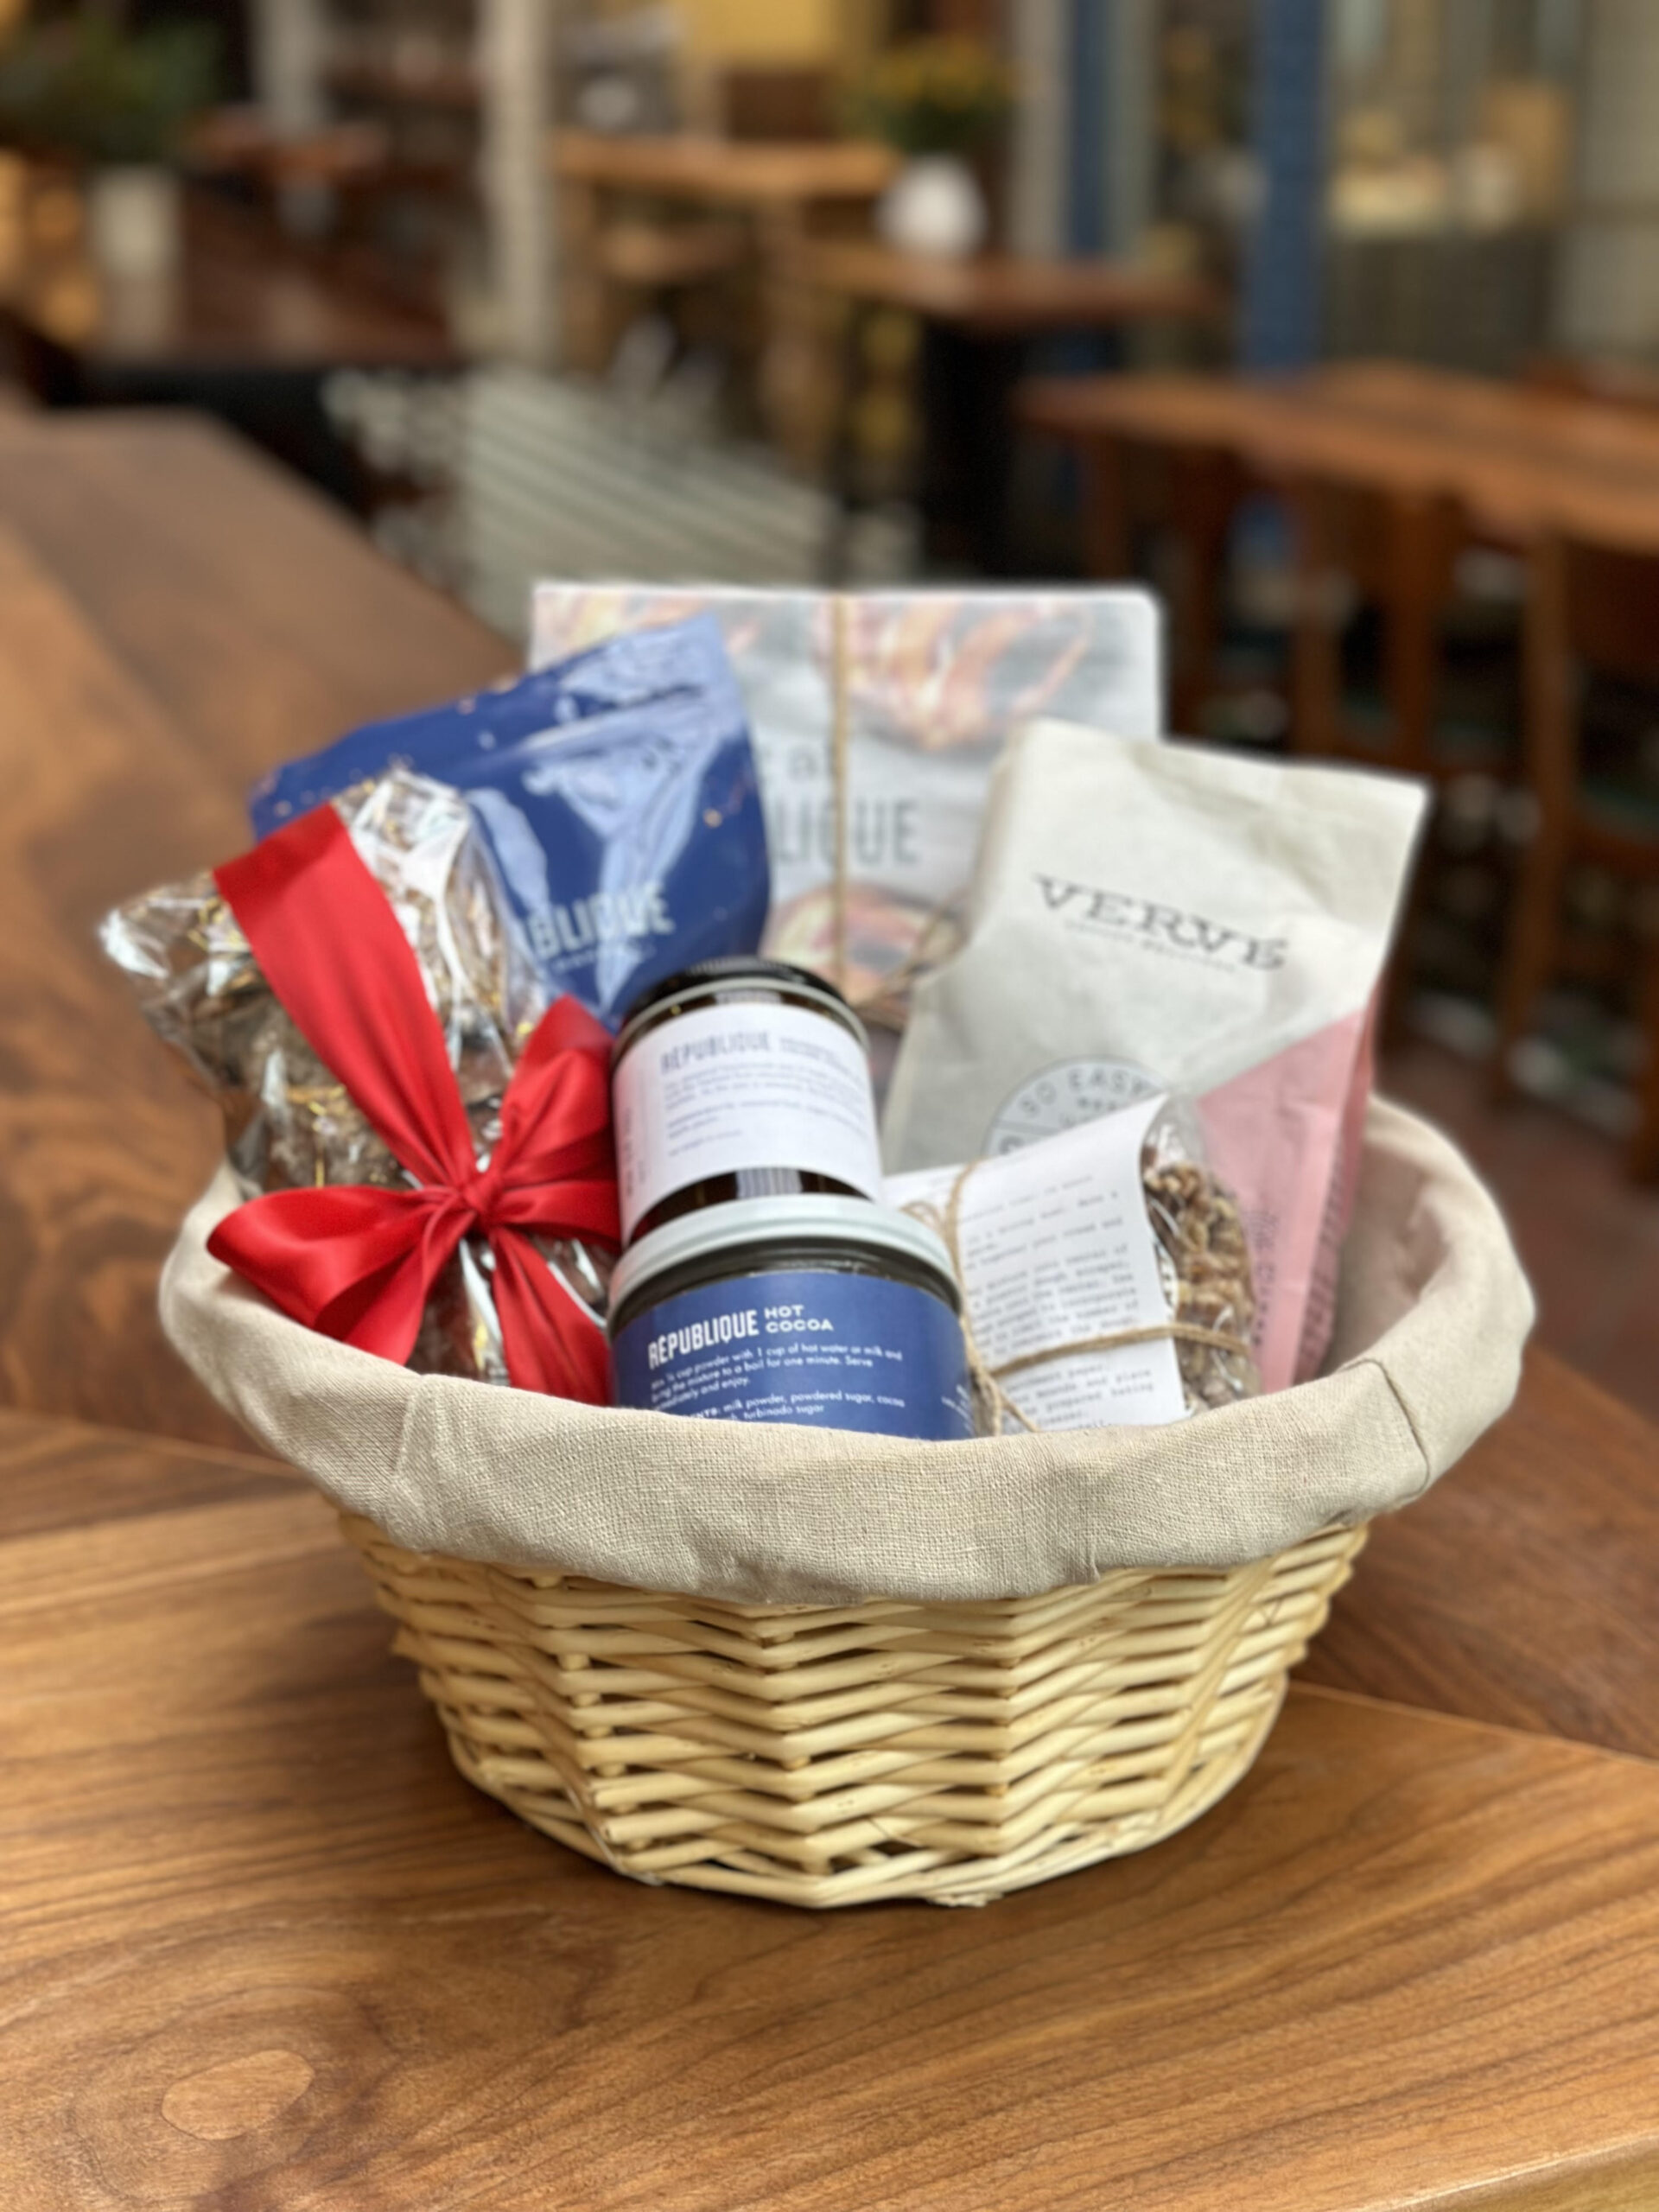 2022 holiday gift basket at republique, featuring granola, coffee, jam, cookies, cocoa mix, scone mix, and a cookbook in a round wicker basket